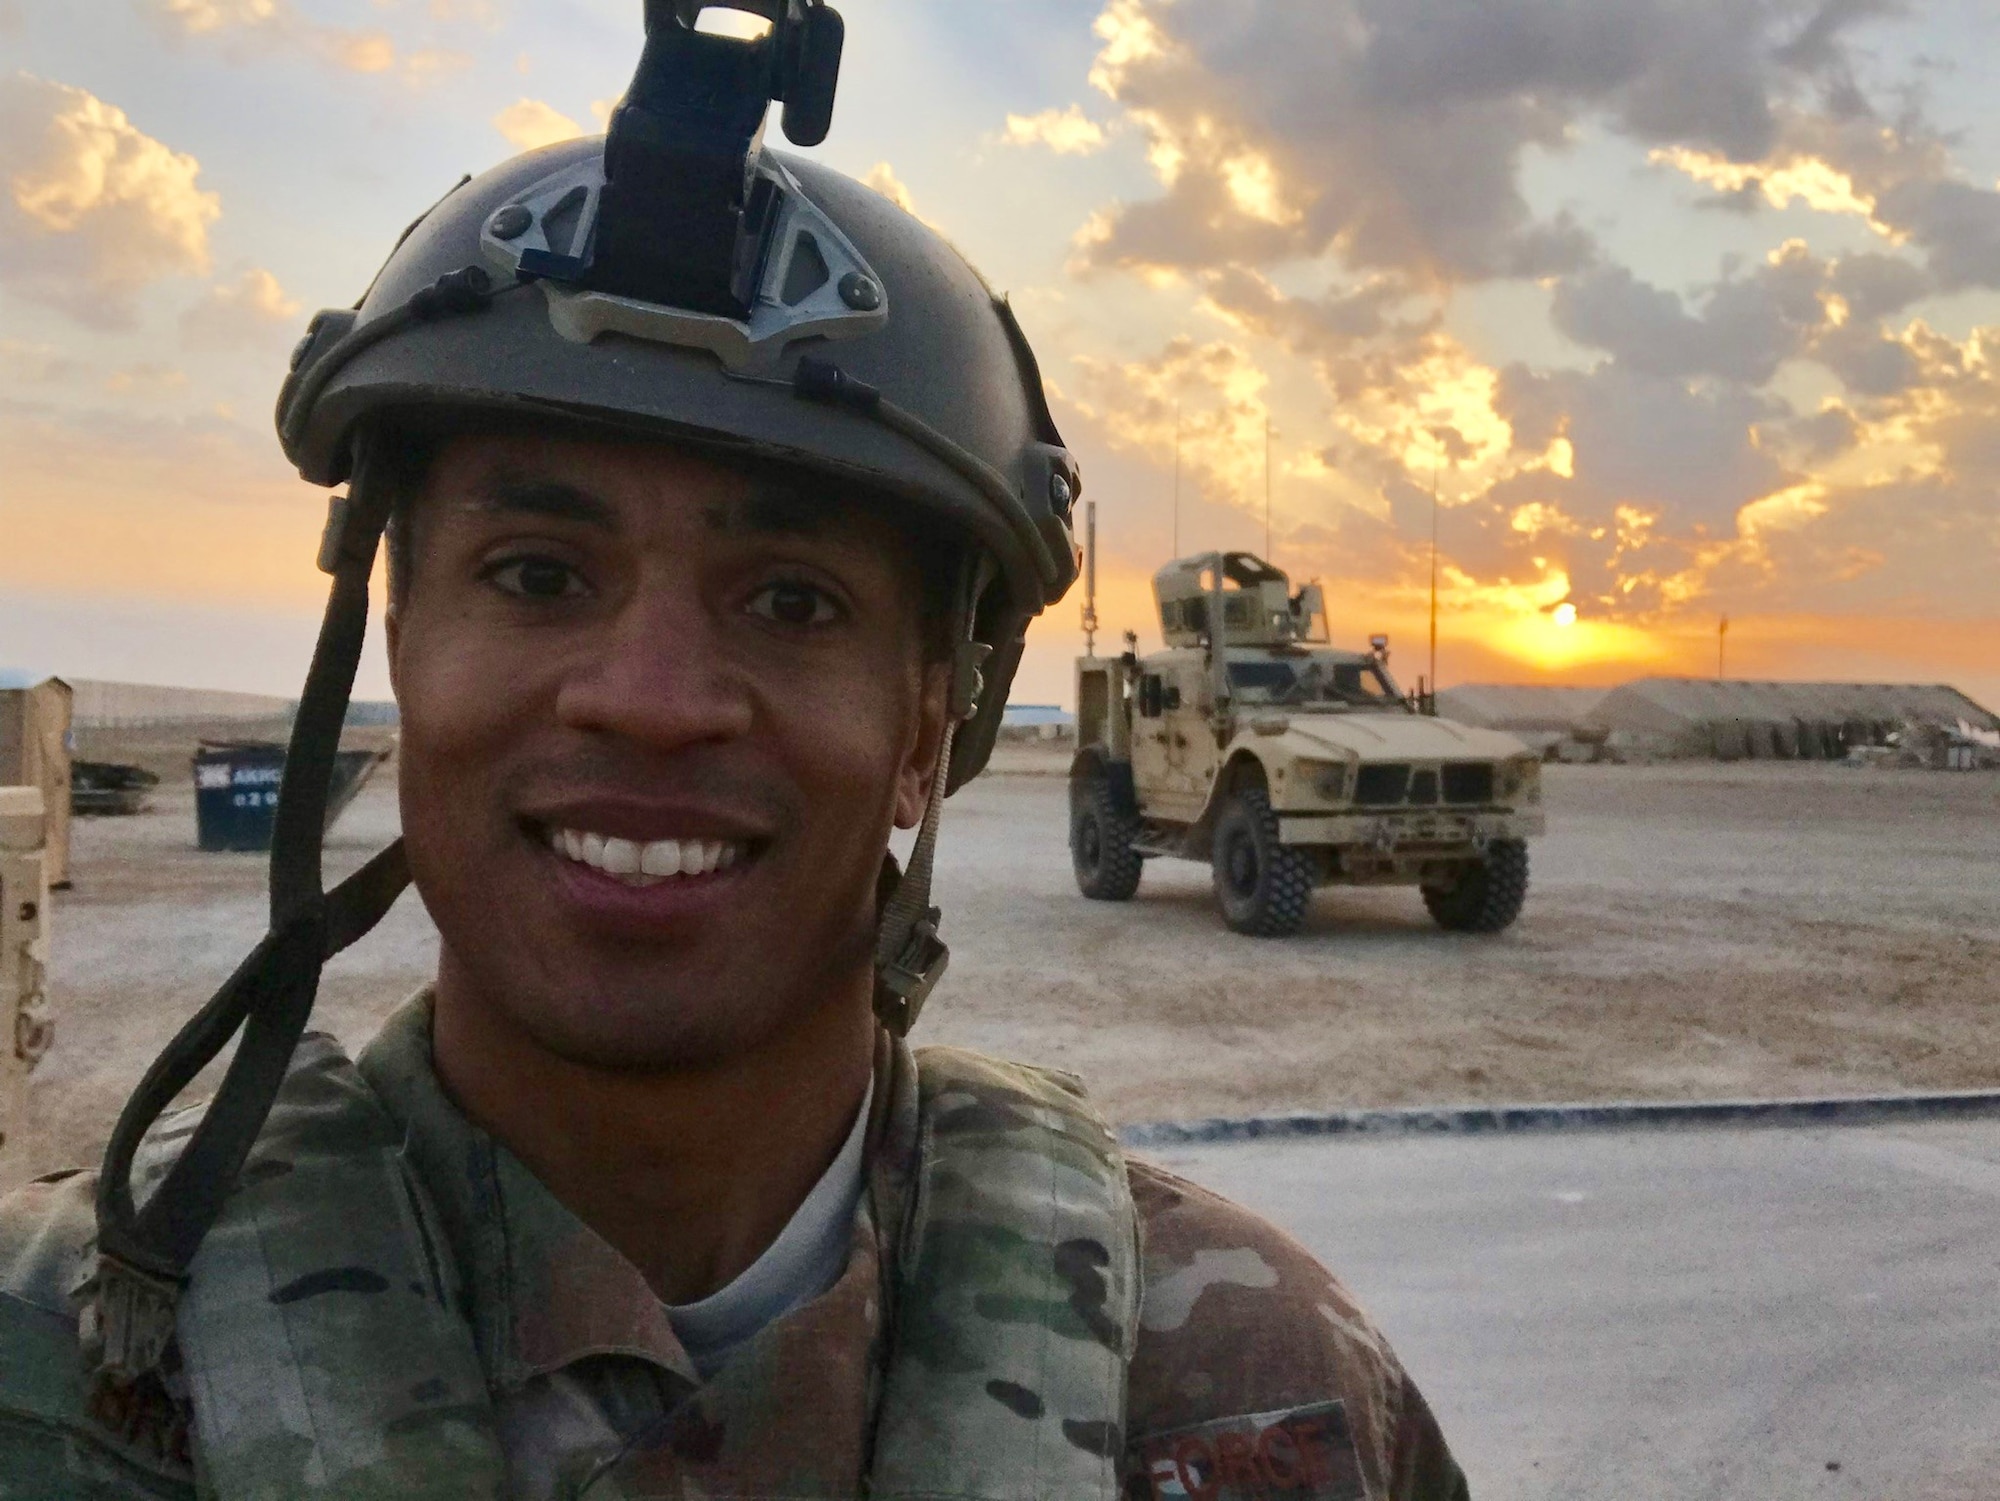 Technical Sgt. Ritchie Brown poses for a photo at Al Asad Air Base, Iraq. Ritchie is one of four 20 AF nominees to AFGSC for the 2020 Lance P. Sijan Leadership Award. (Courtesy photo)